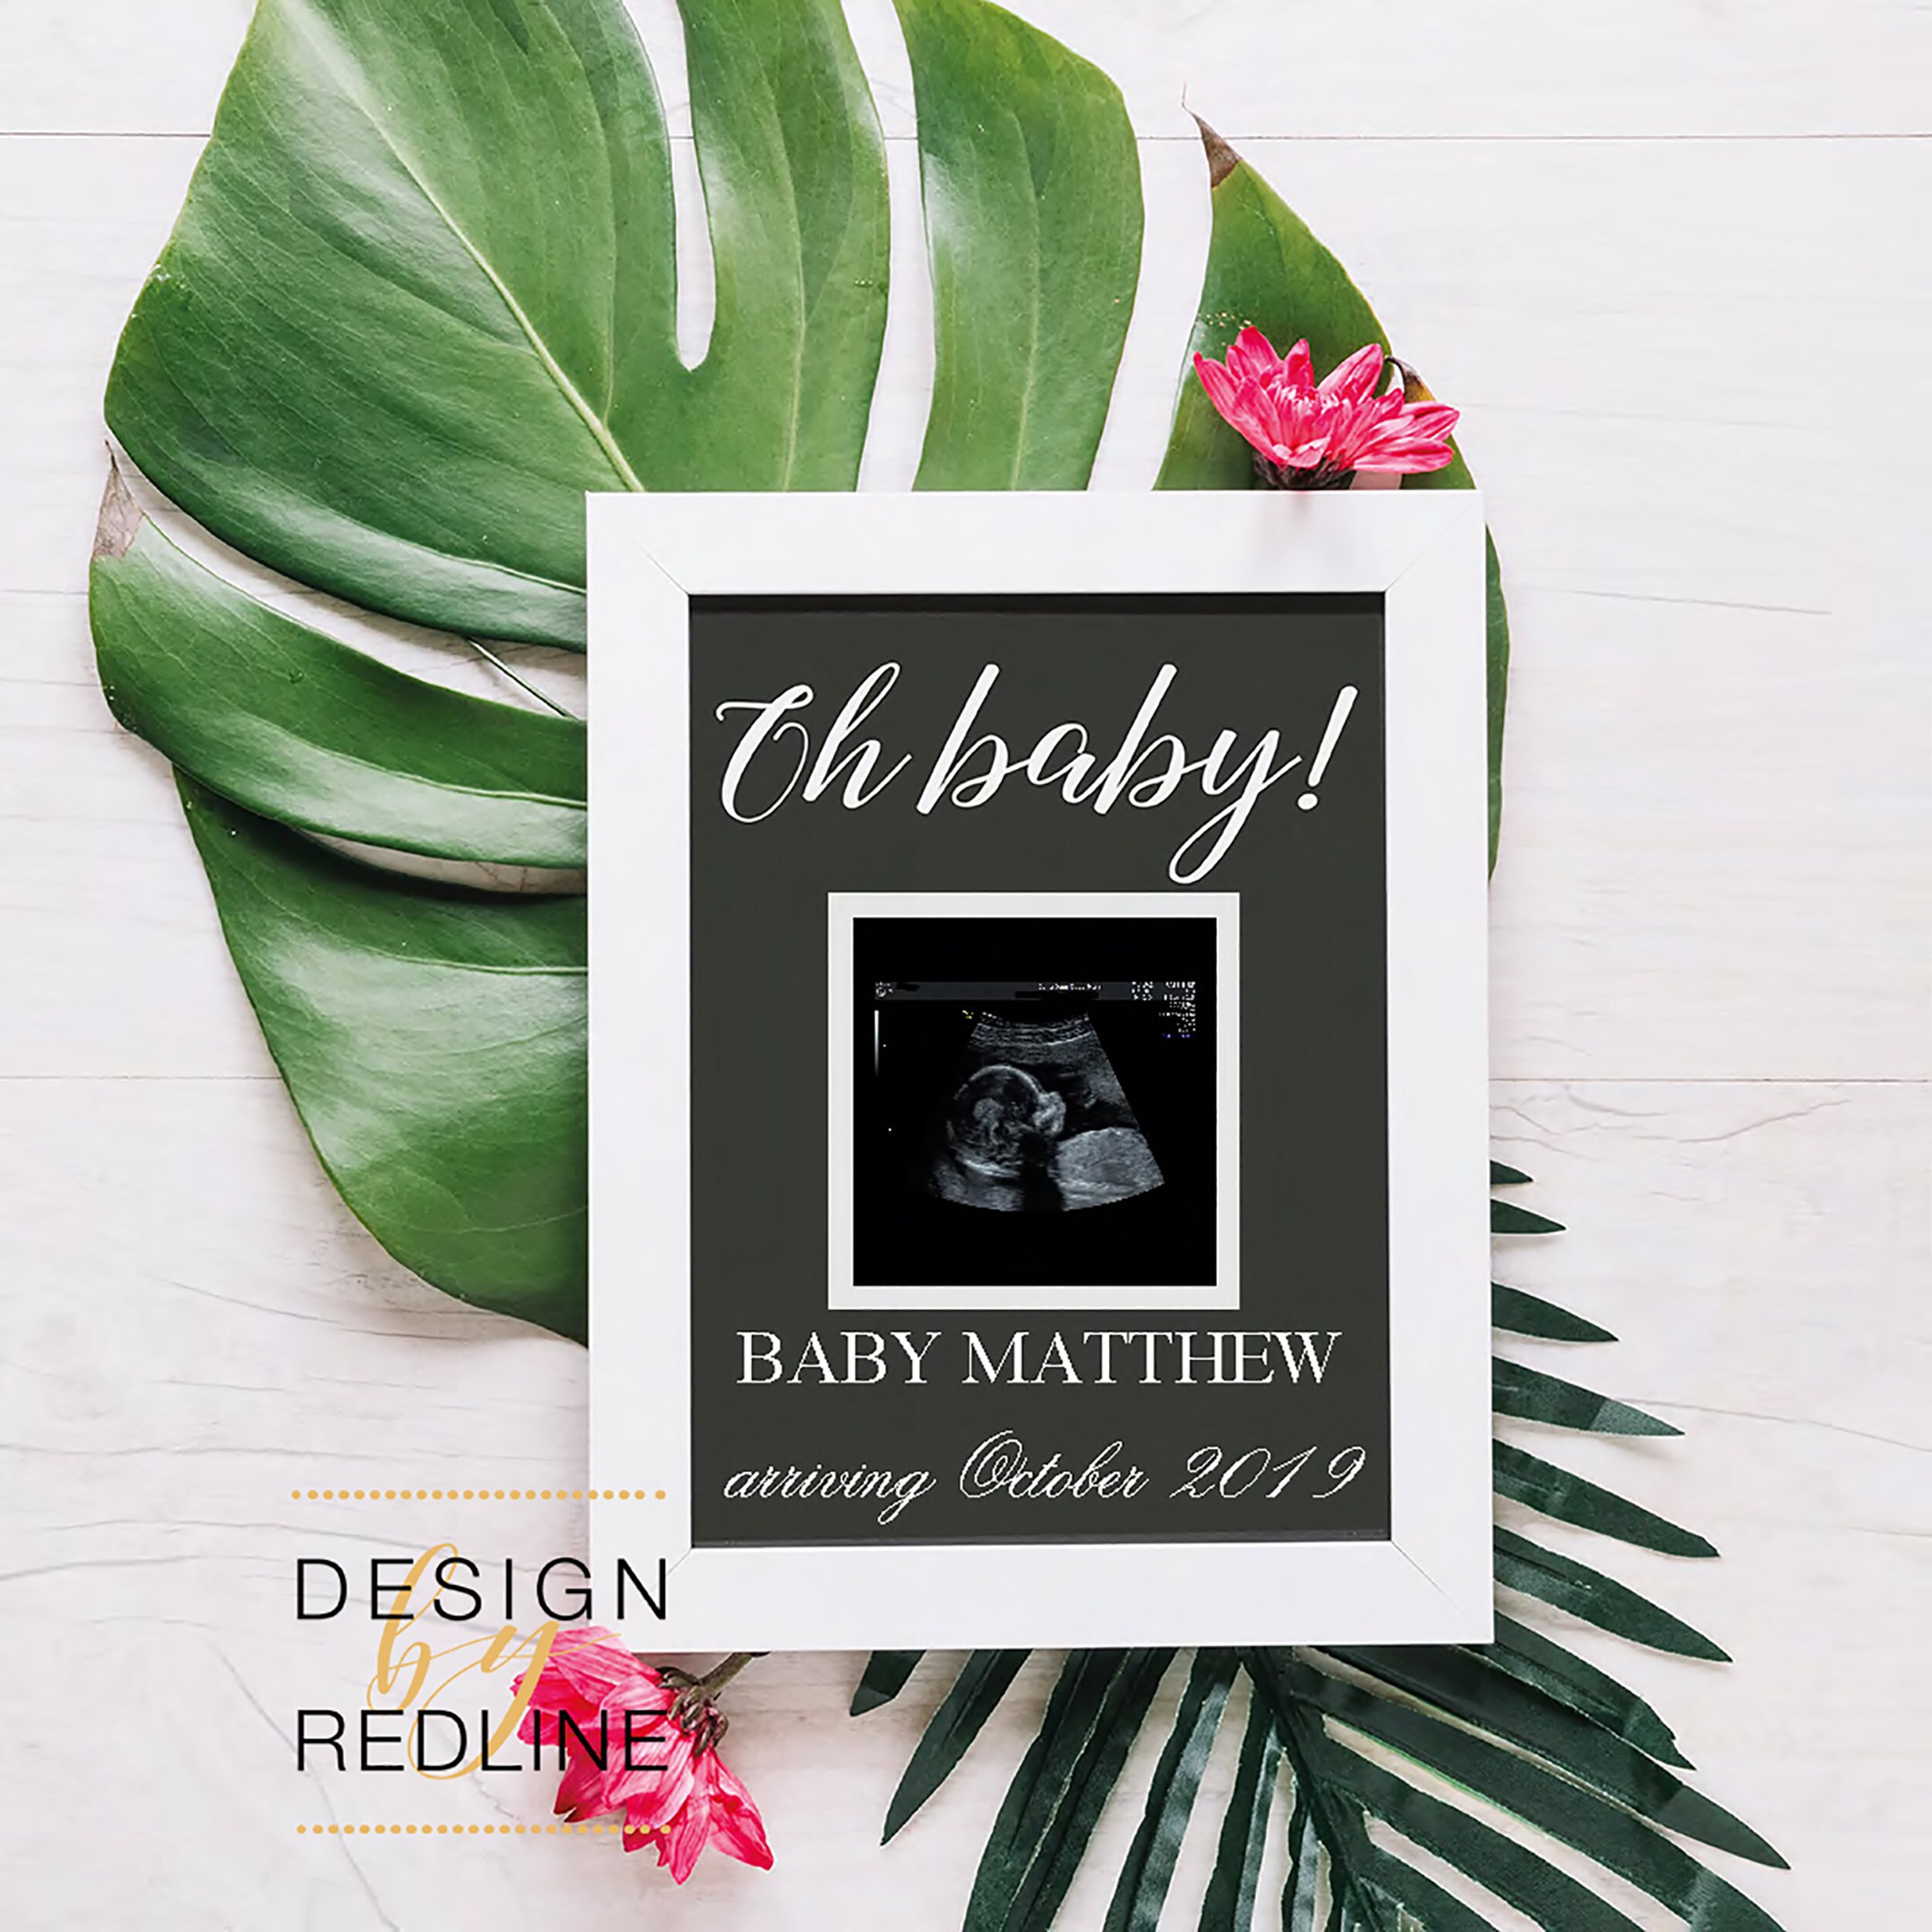 Download Pregnancy Digital Announcement, Social Media Baby Announcement with Photo, Personalized Tropical ...